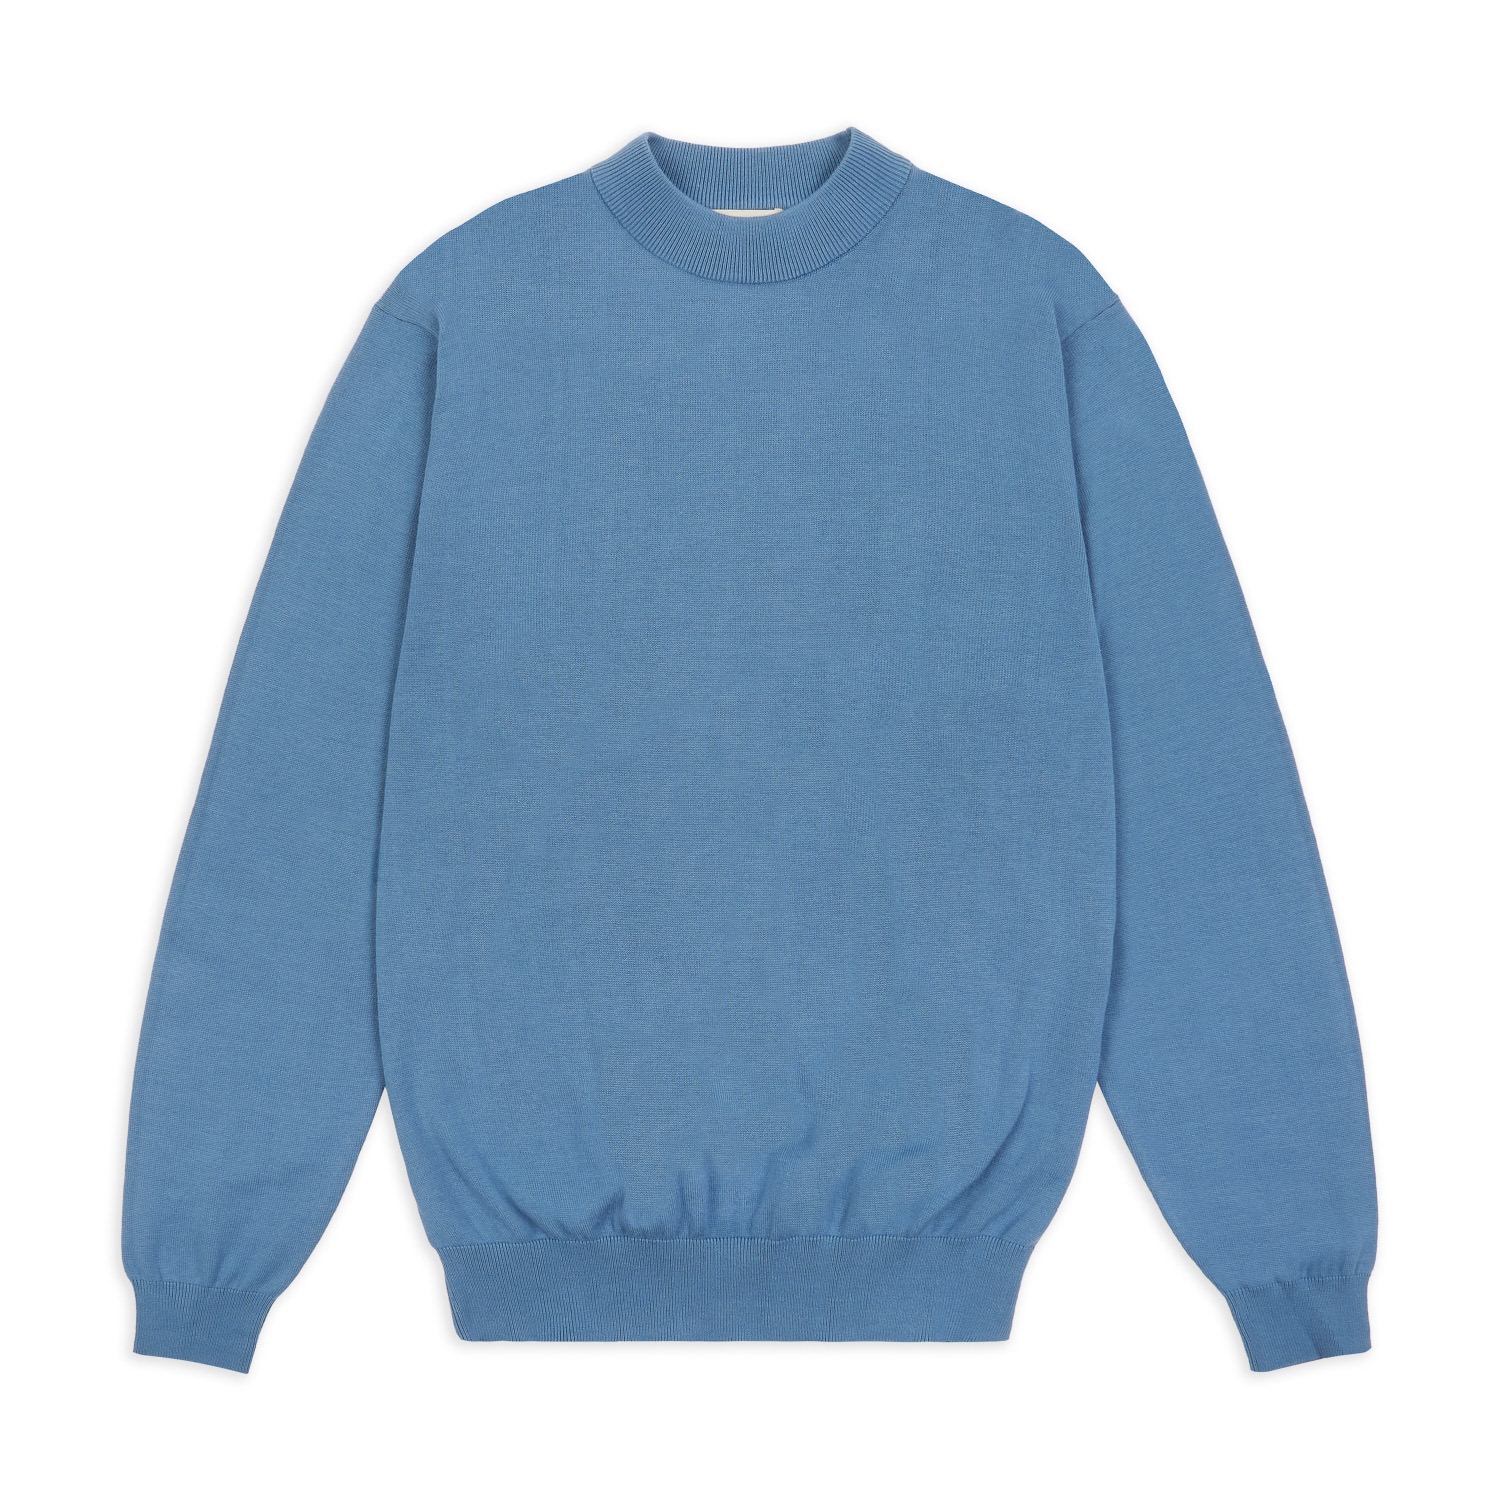 Burrows And Hare Men's Mock Turtle Neck - Blue